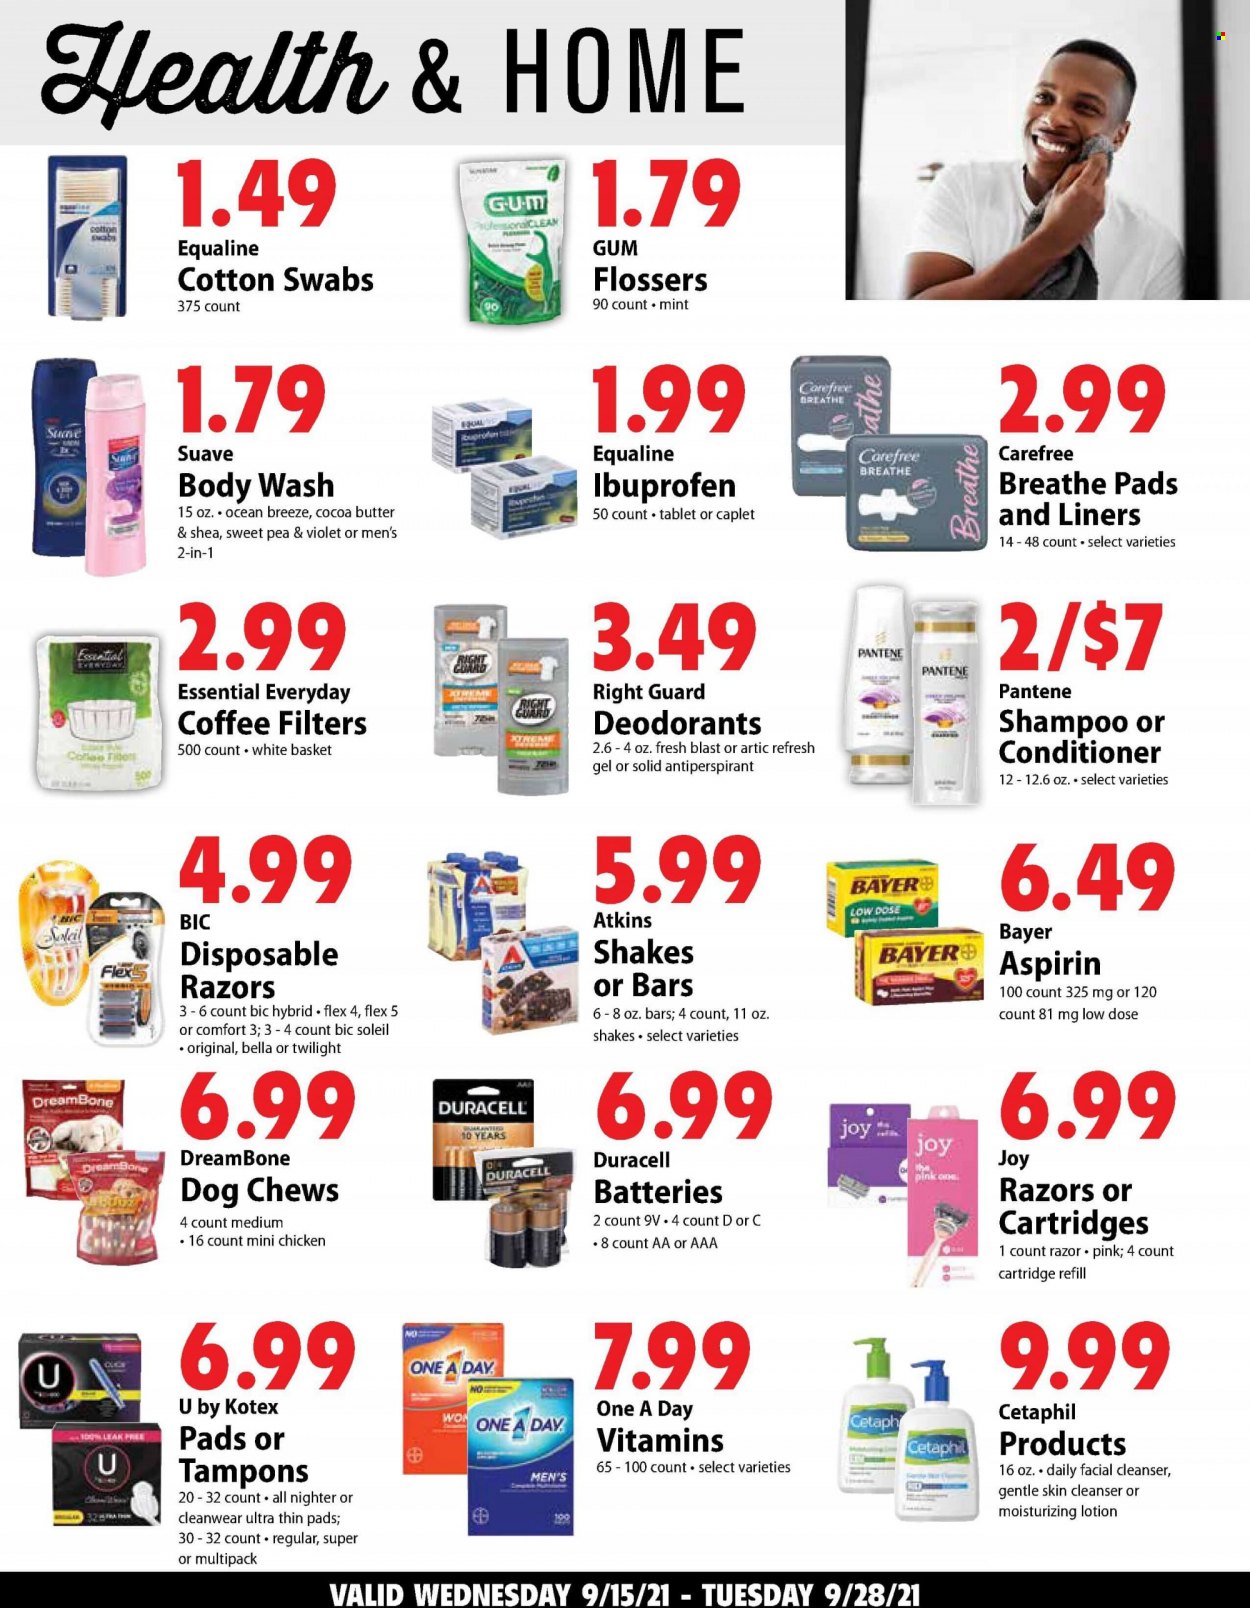 Festival Foods ad  - 09.22.2021 - 09.28.2021.